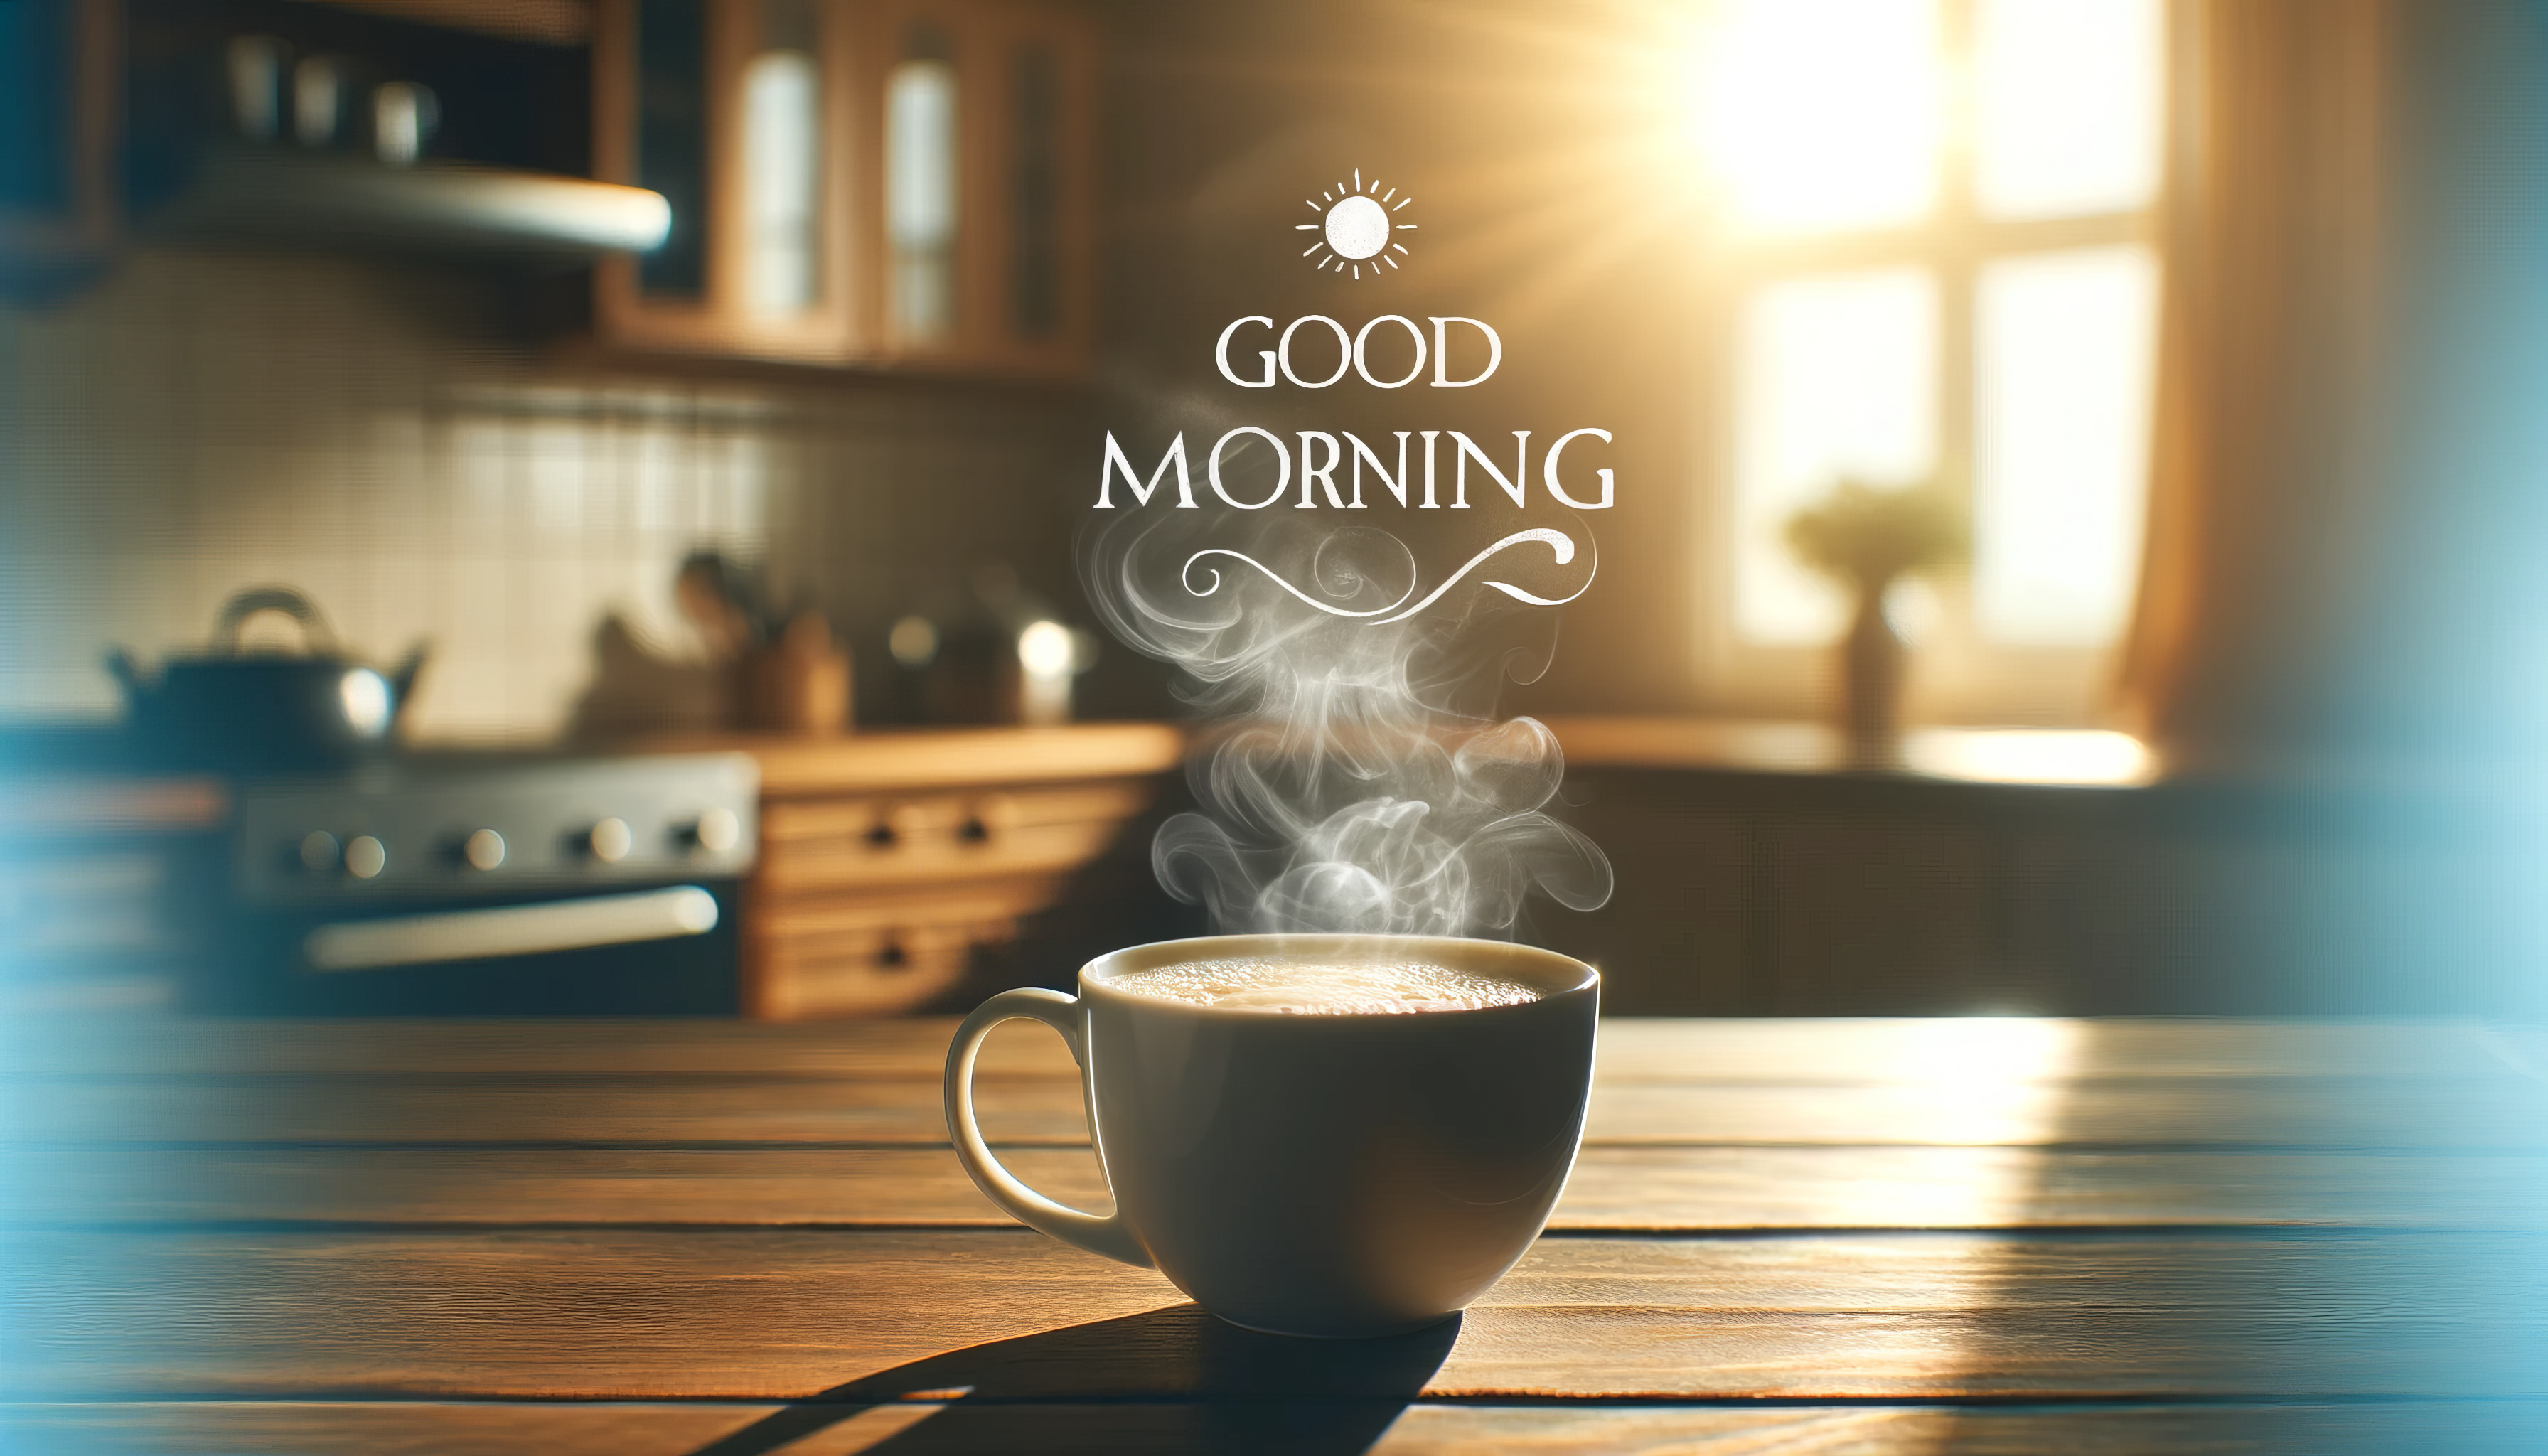 HD desktop wallpaper featuring a steaming cup of coffee with 'Good Morning' text, set against a sunny kitchen background.